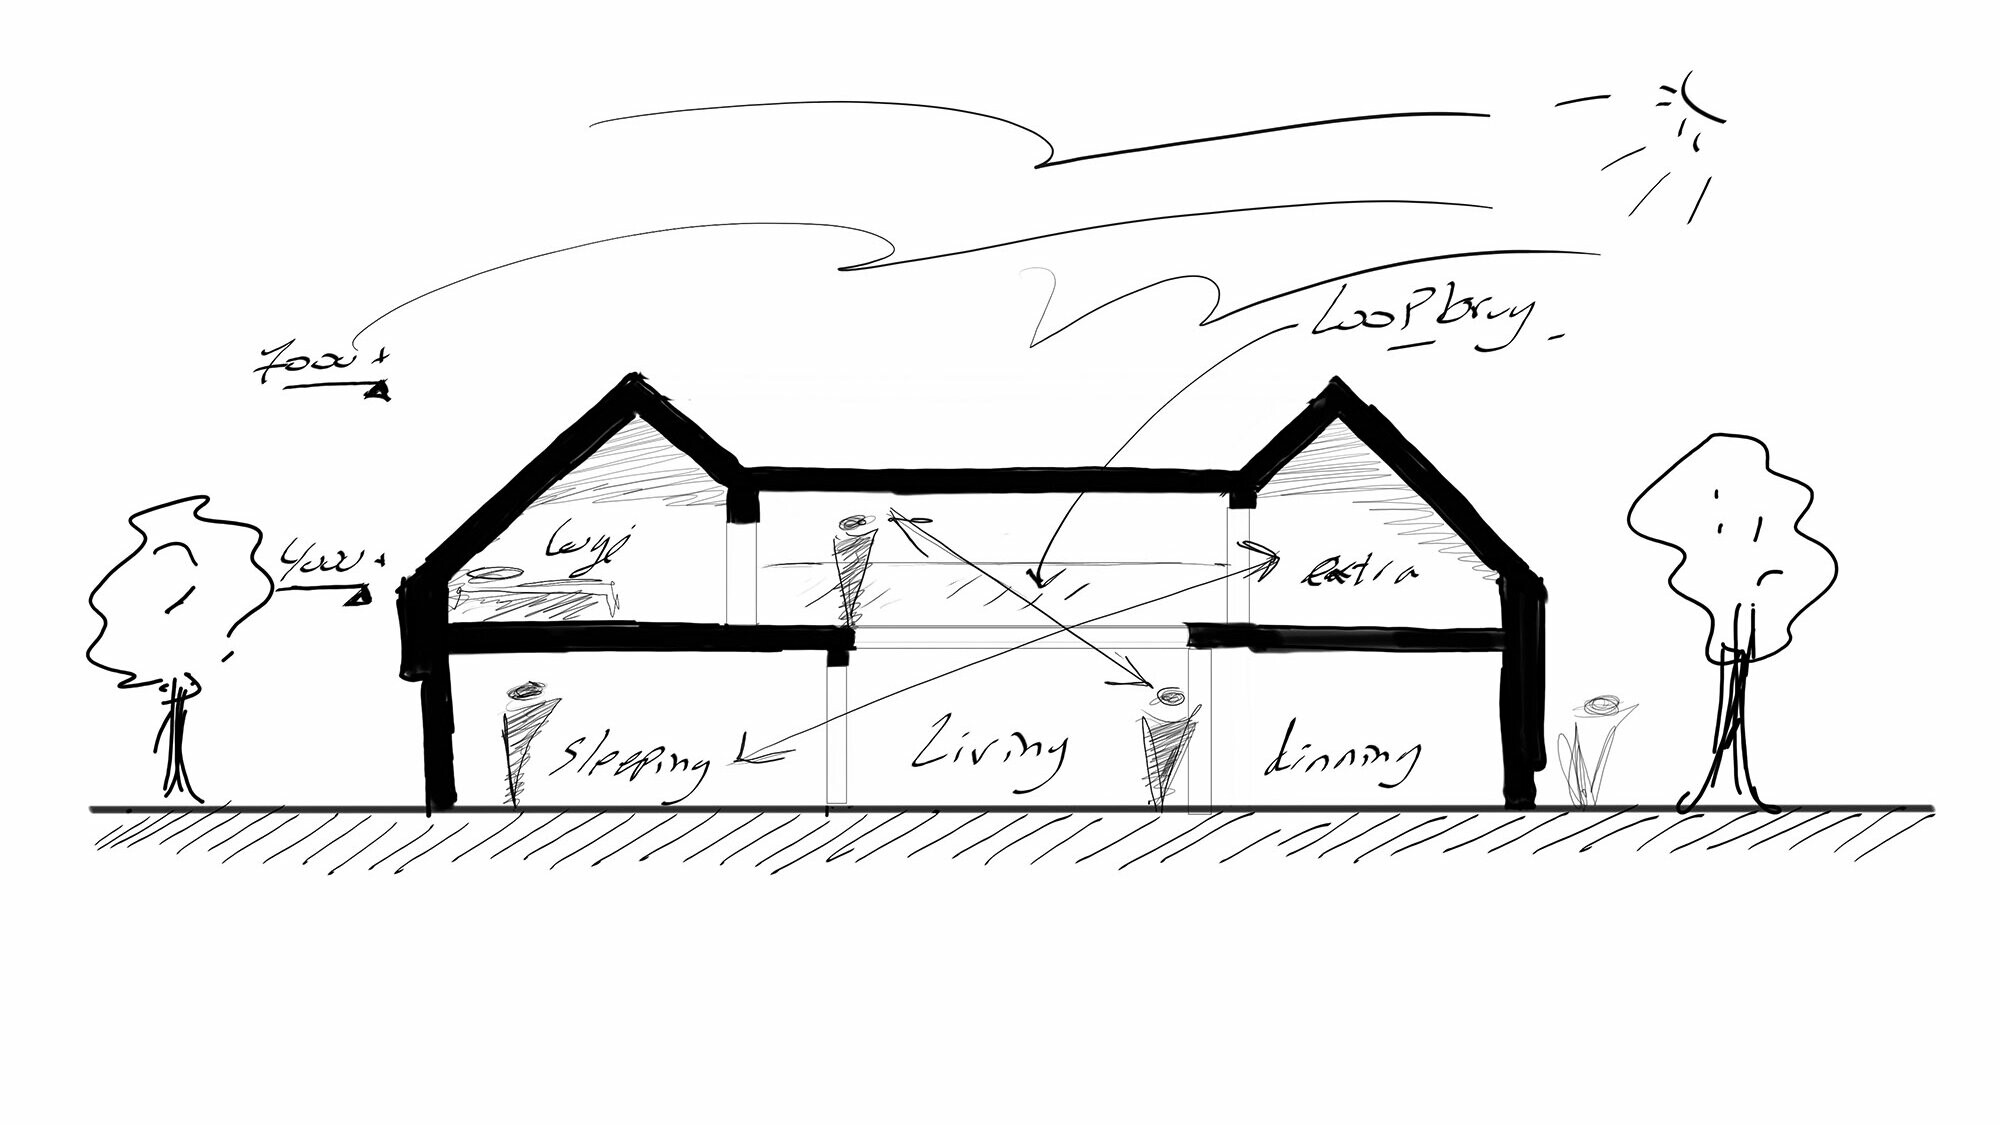 A sketchy representation of a two-storey detached house with a labelled room layout. The house has a gabled roof, multiple windows and chimneys, and is surrounded by two trees. The layout includes a living area, a library, bedrooms and a kitchen.